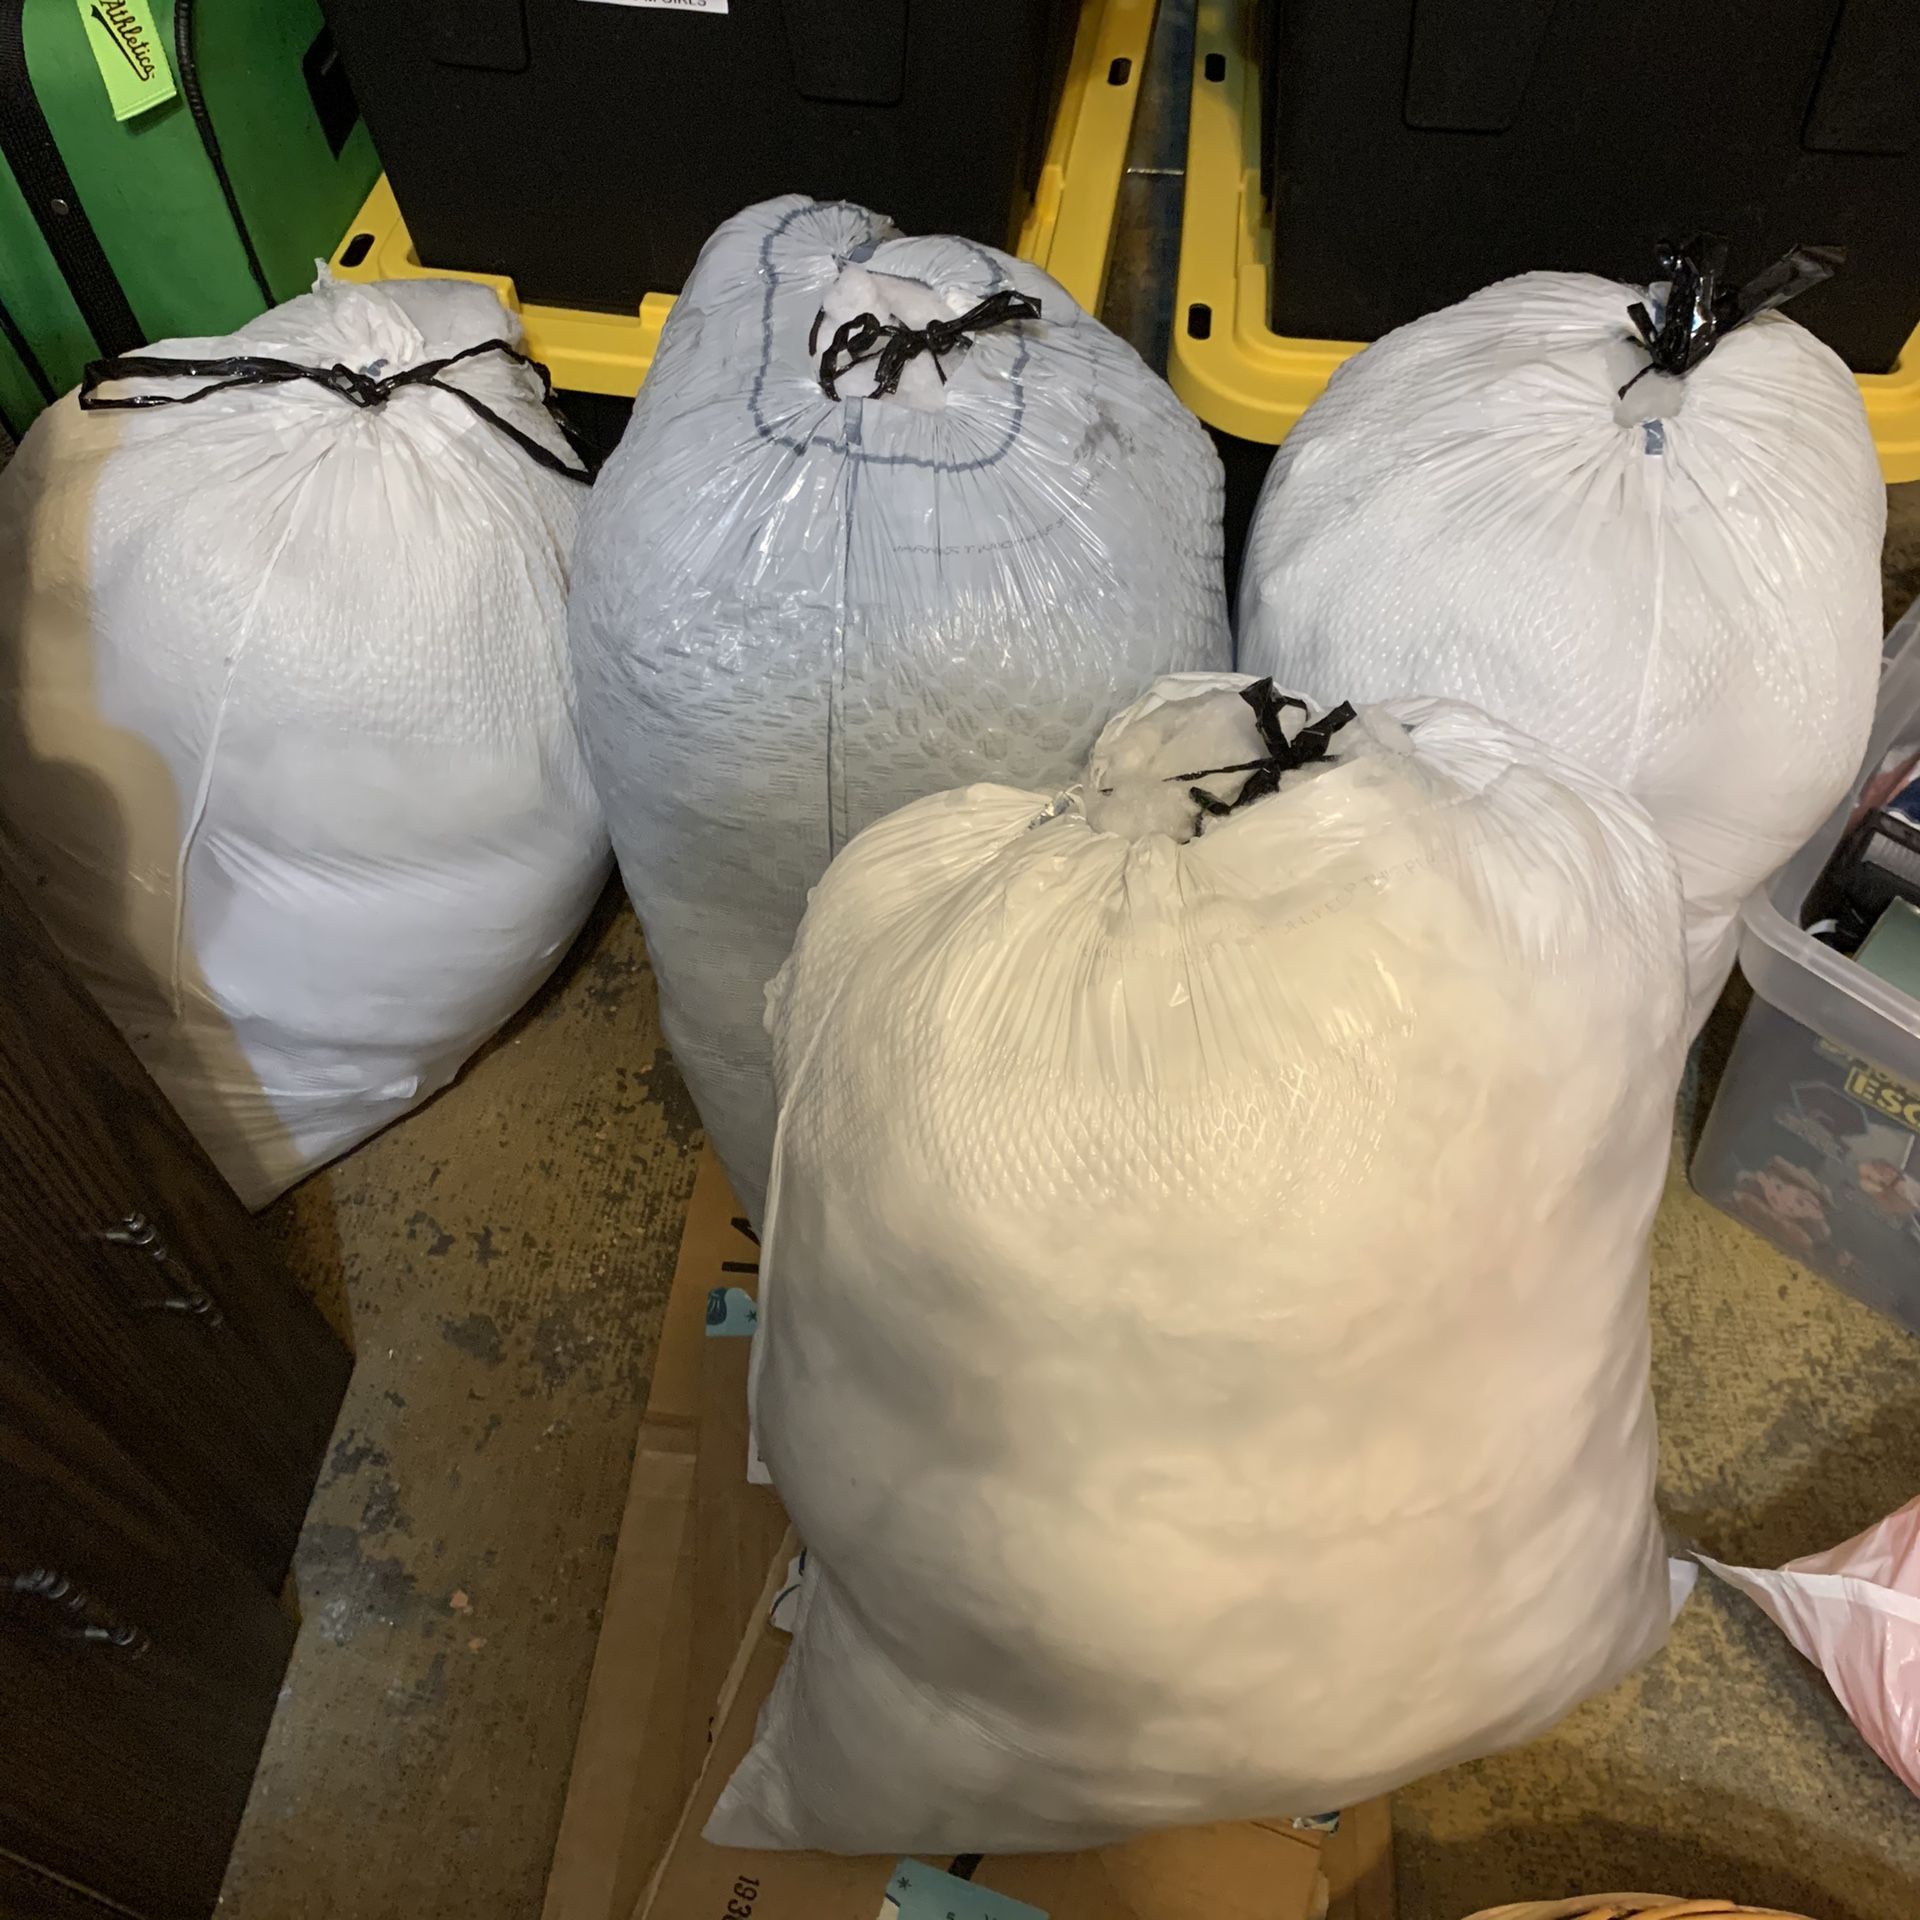 Large bags of polyester fiber fill